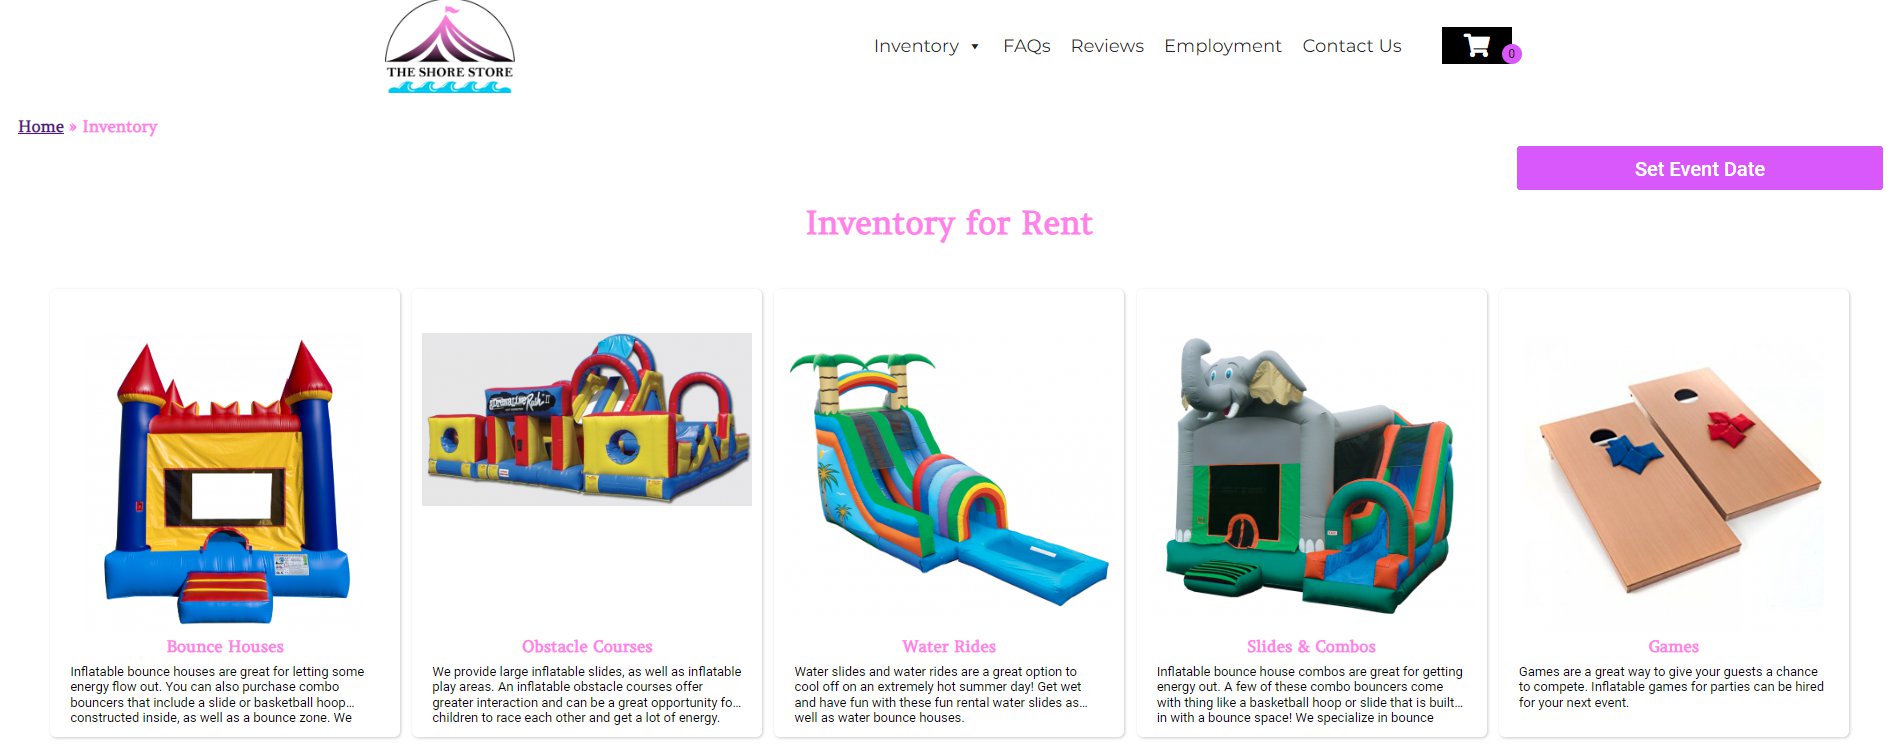 Shore Store Rental company in Southern Delaware